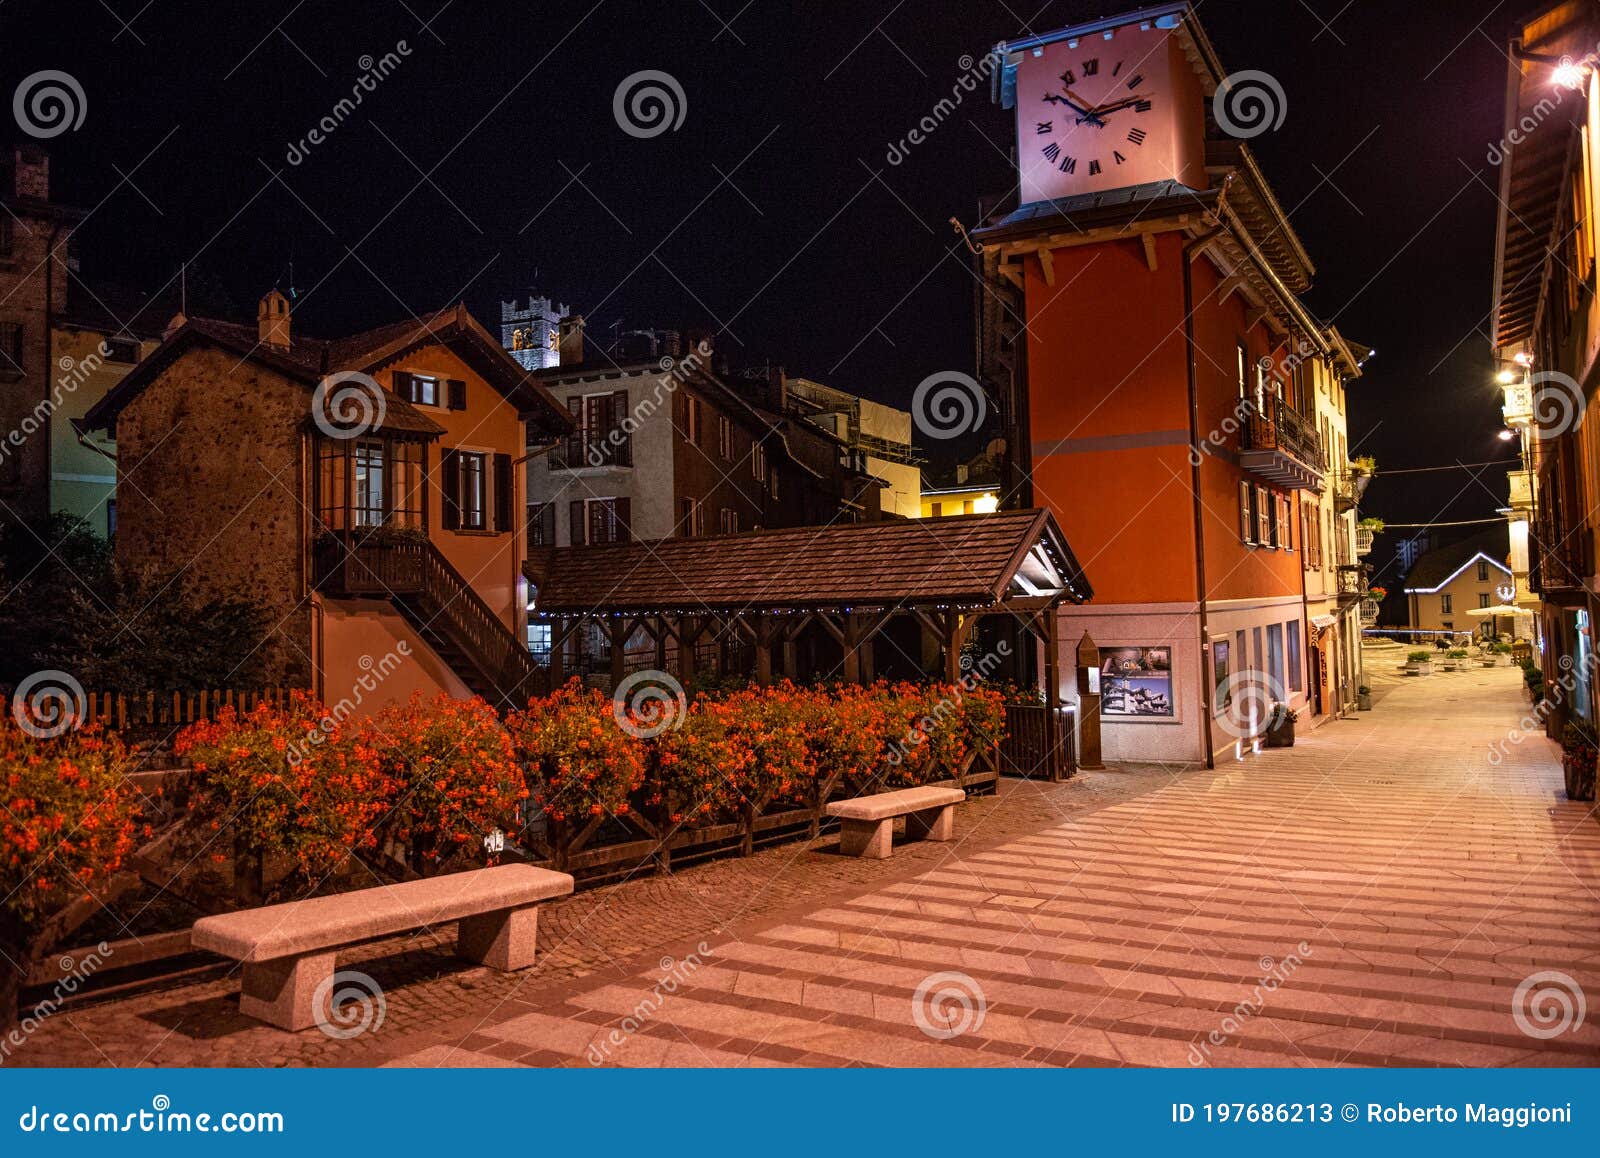 ponte di legno by night, valle camonica valley, lombardy italy.